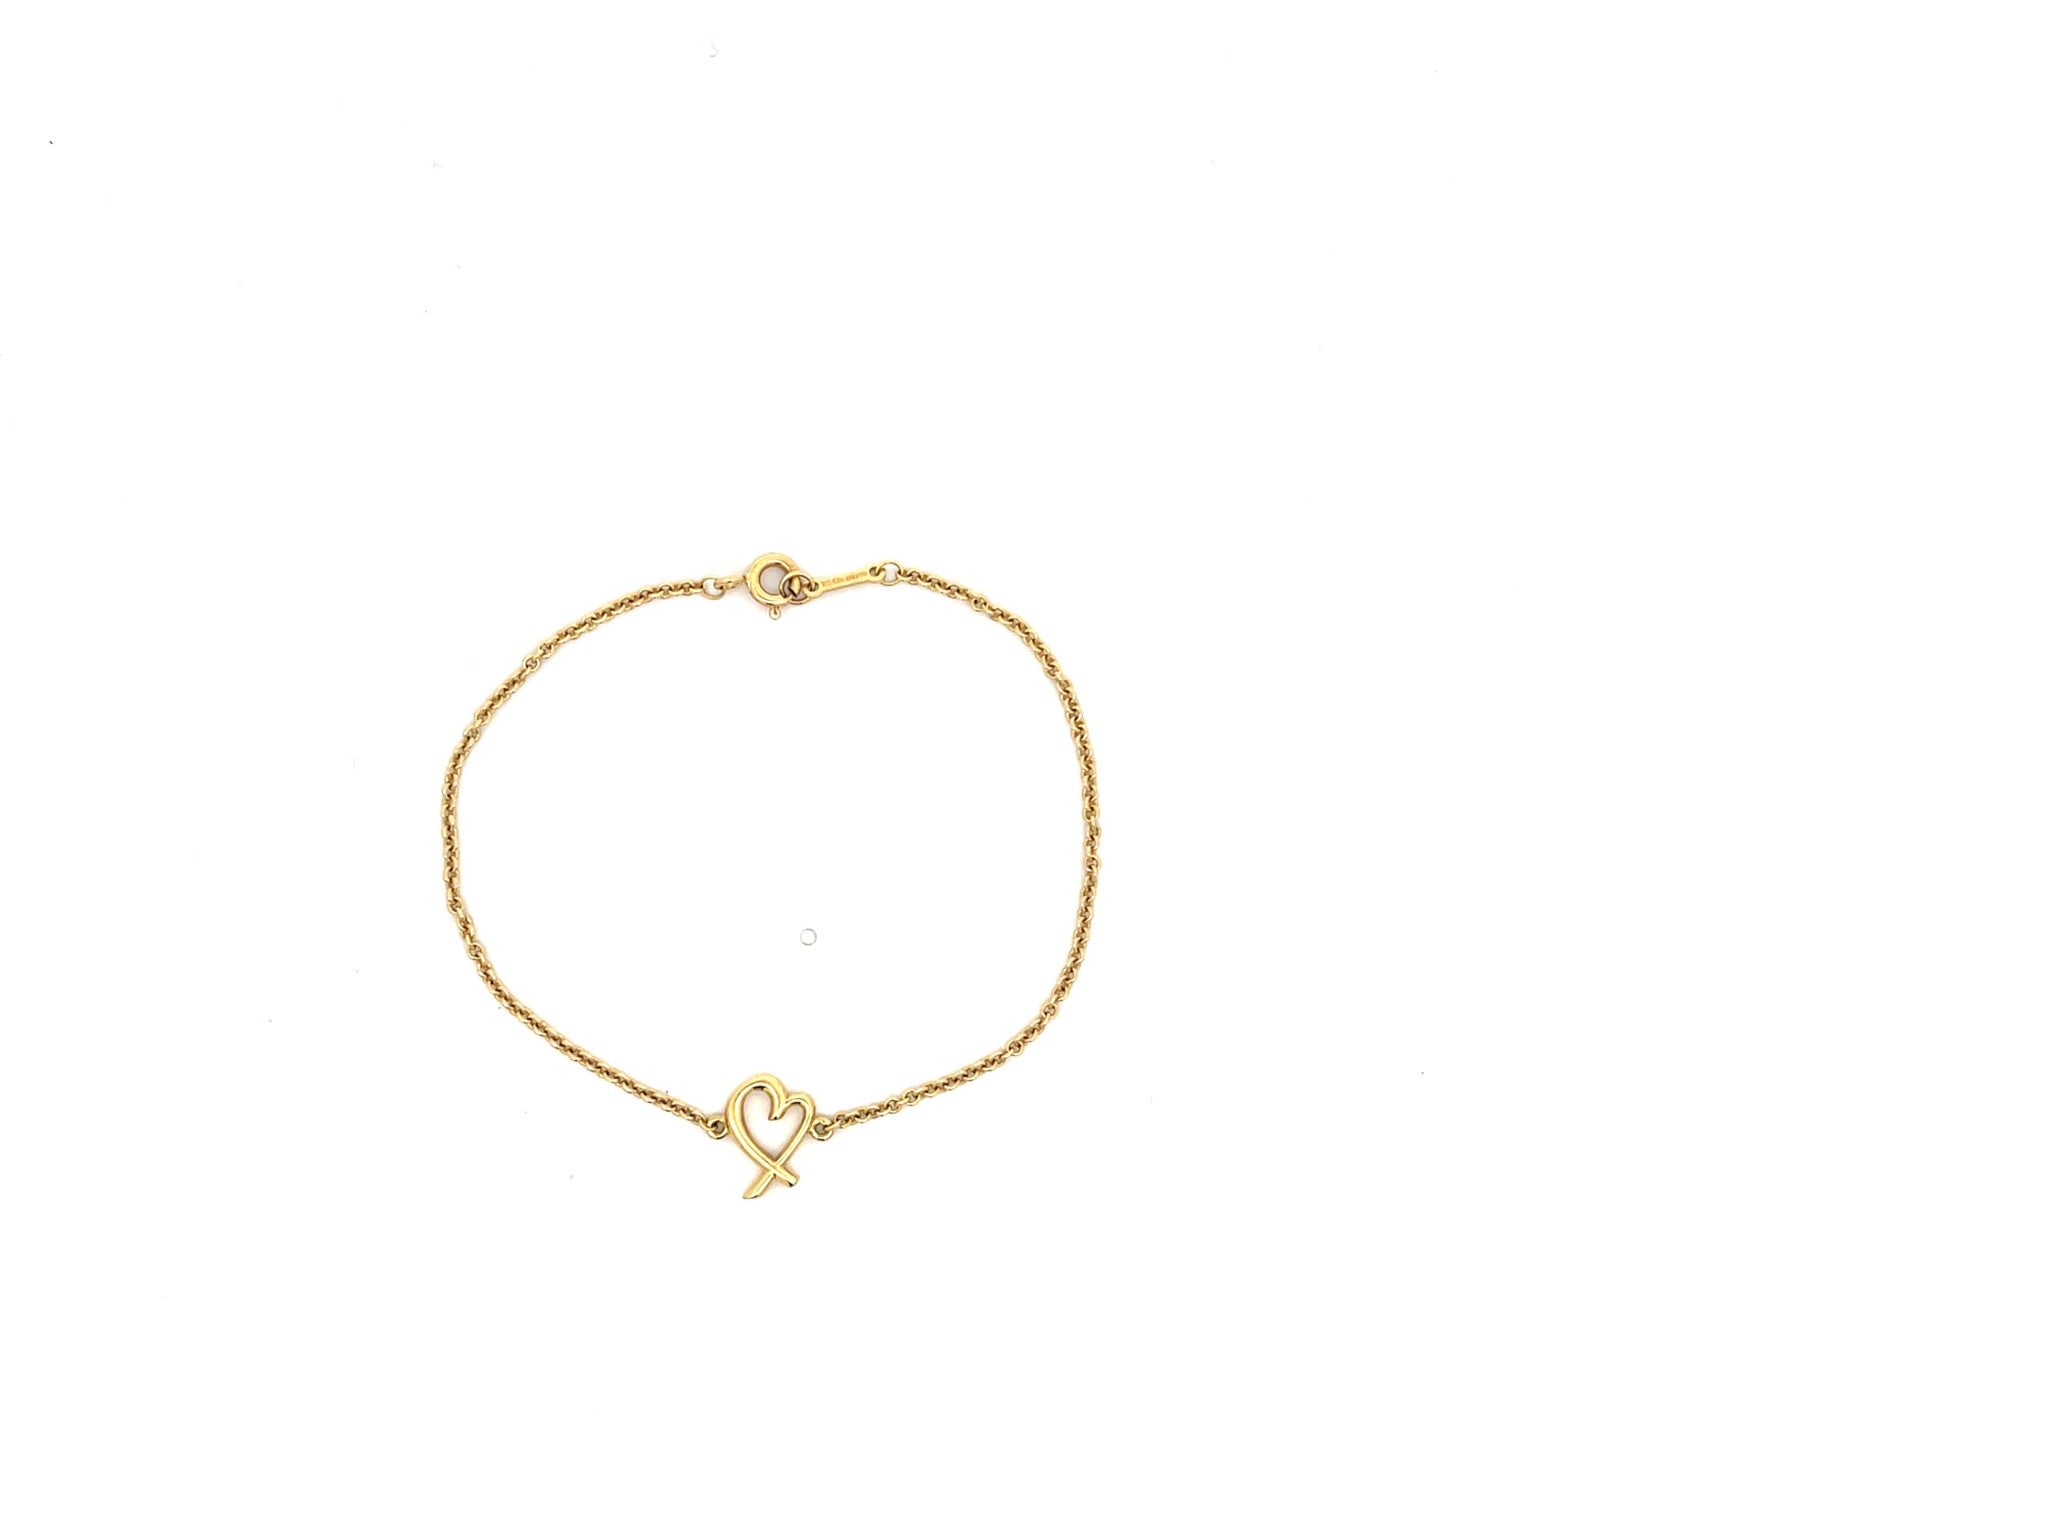 Tiffany and Co. Loving Heart Bracelet in 18k Yellow Gold